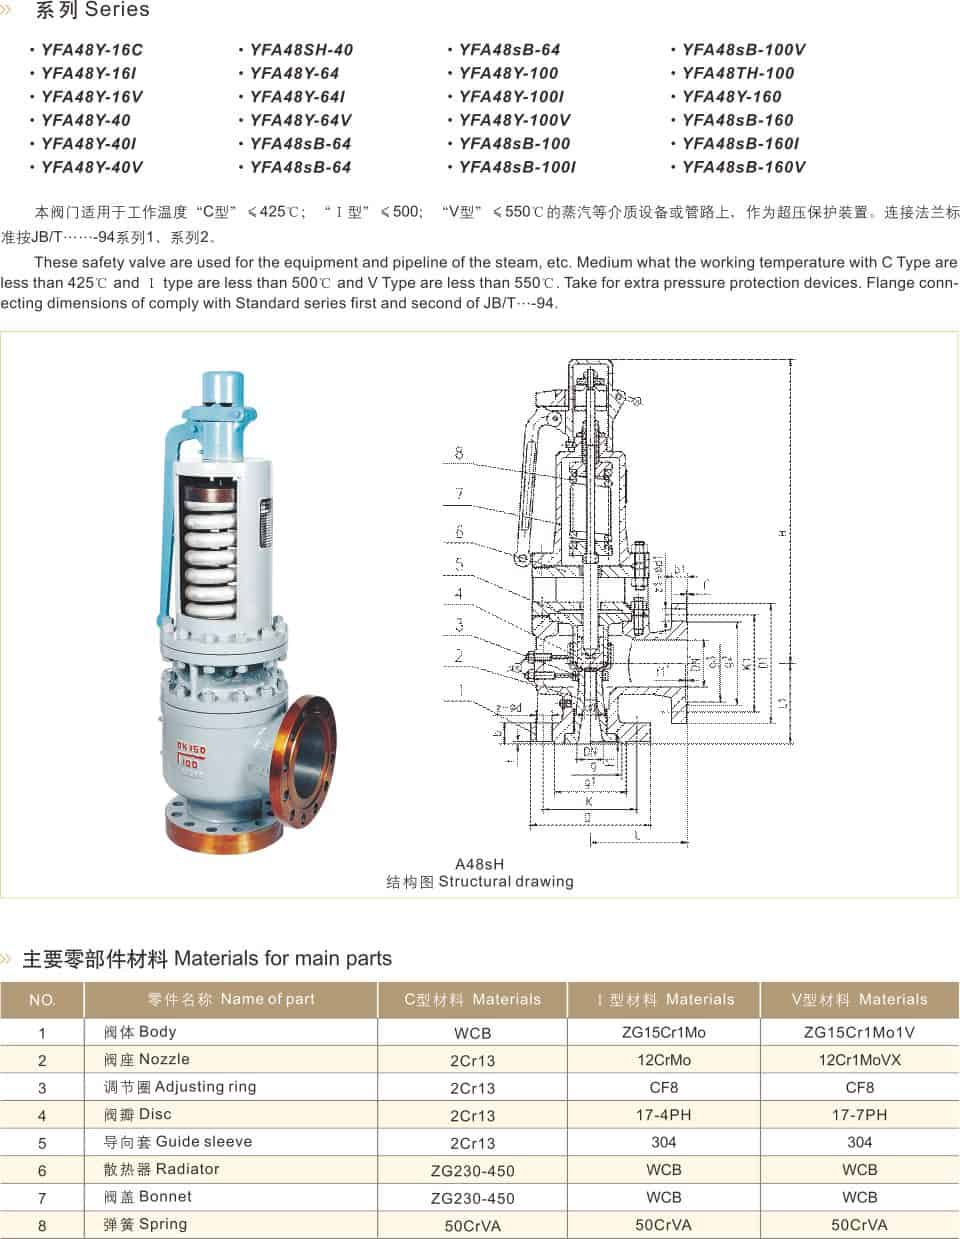 High temperature and high pressure safety valve parameters